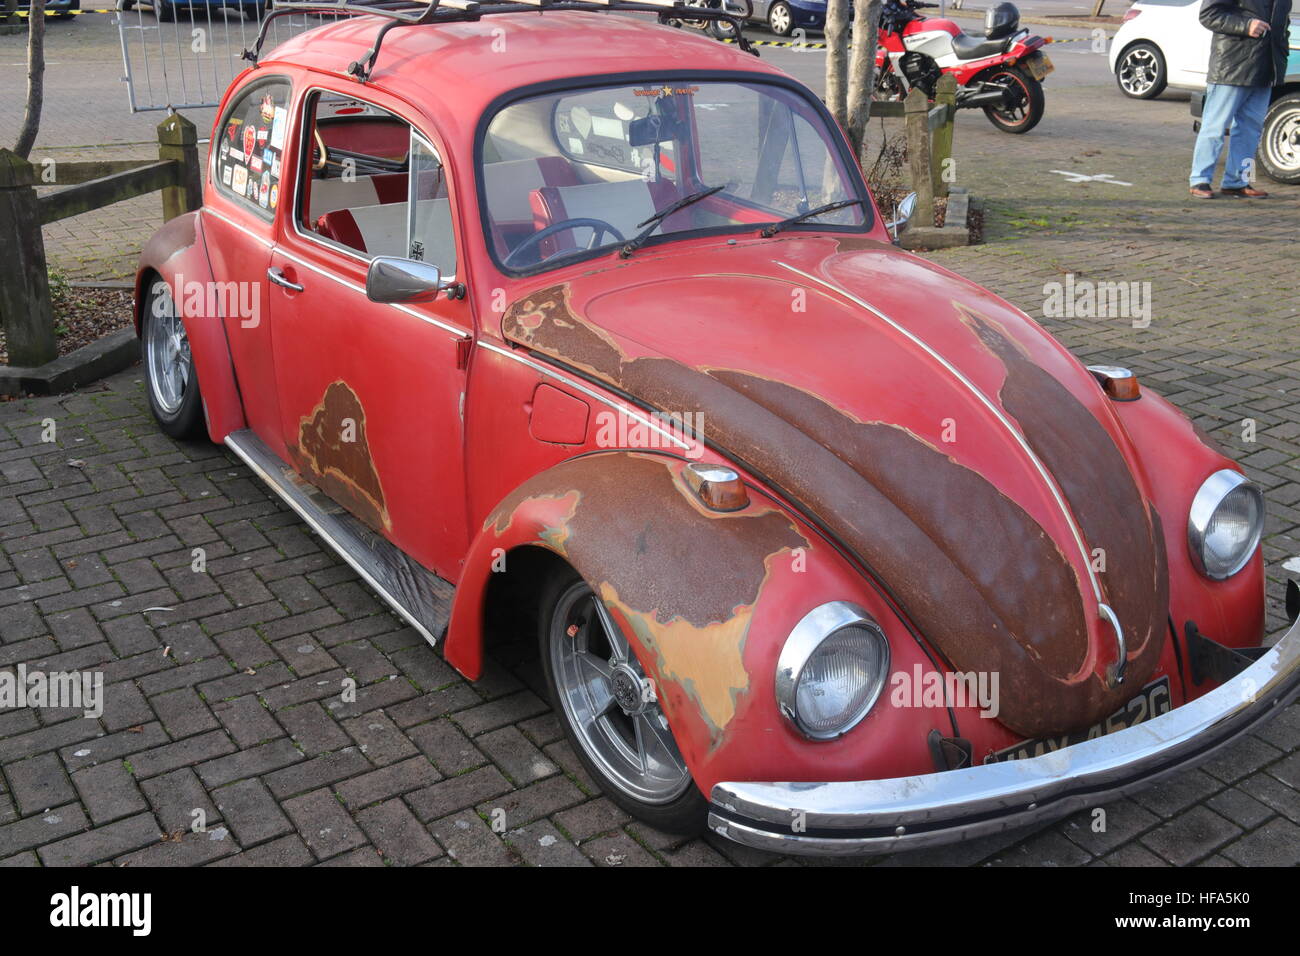 26TH DECEMBER 2016,WICKHAM,HANTS: An old retro classic beetle car at a show in portsmouth, england on the 26th Stock Photo